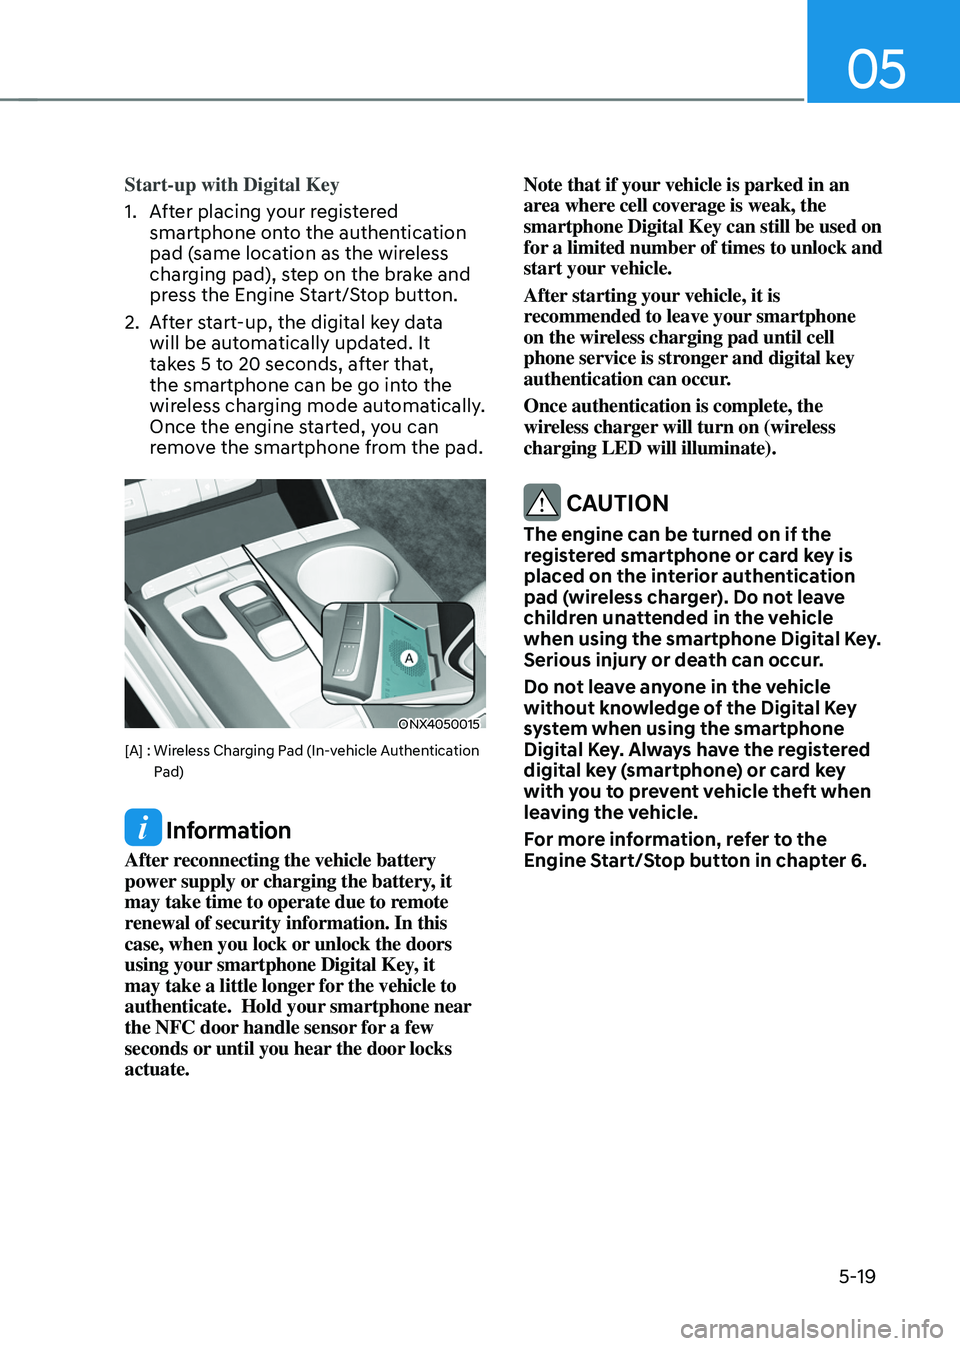 HYUNDAI TUCSON 2022  Owners Manual 05
5-19
Start-up with Digital Key
1. After placing your registered 
smartphone onto the authentication 
pad (same location as the wireless 
charging pad), step on the brake and 
press the Engine Start